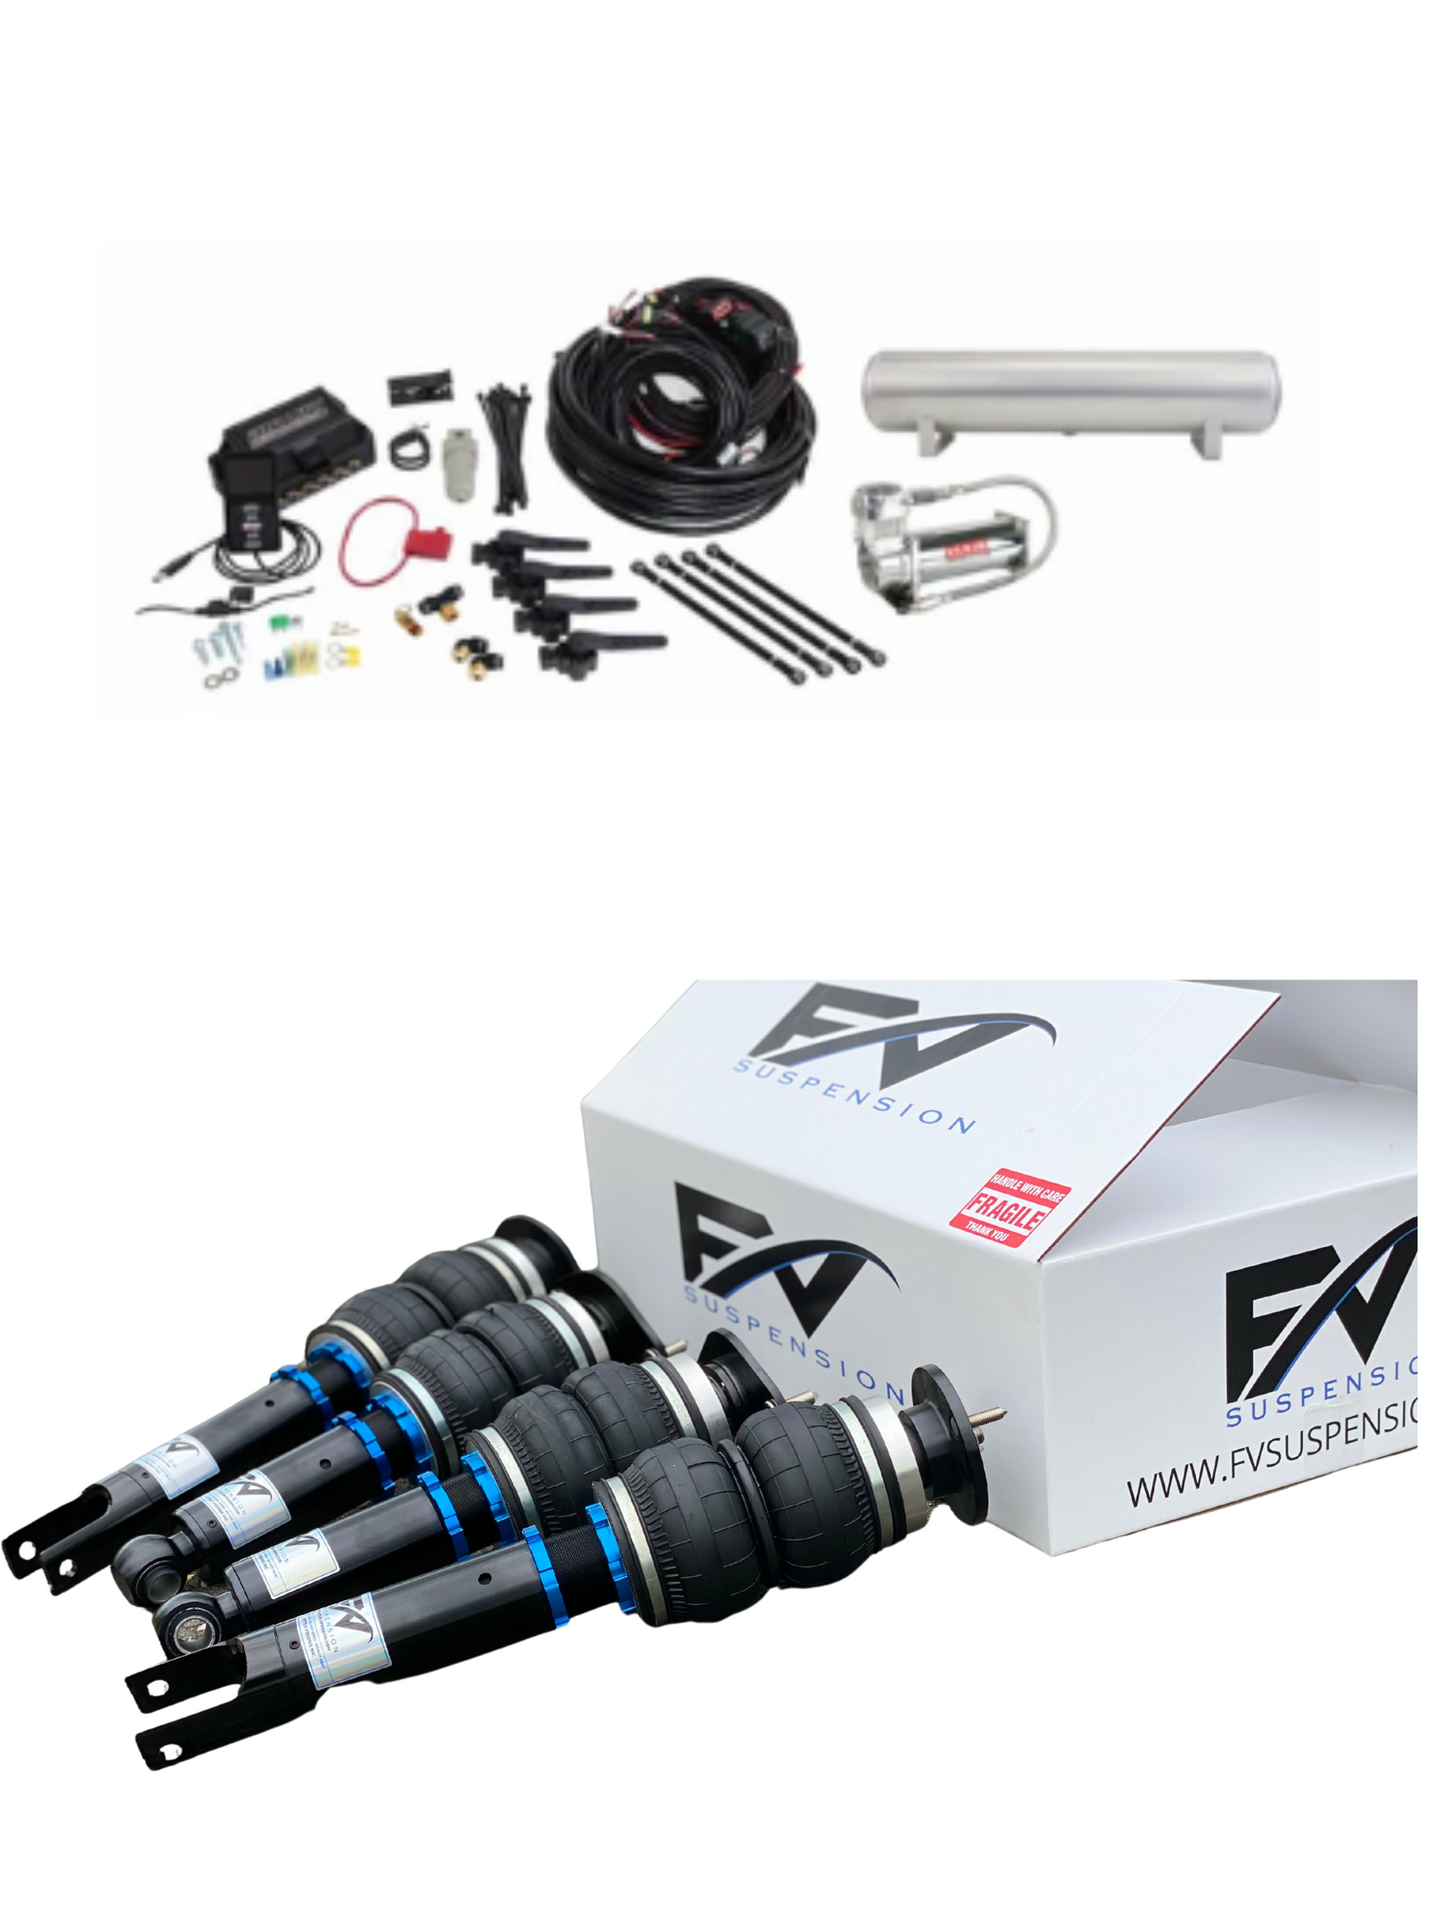 FV Suspension 3H Tier 3 Complete Air Ride kit for 2018+ Toyota Camry - FVALtier3kit636